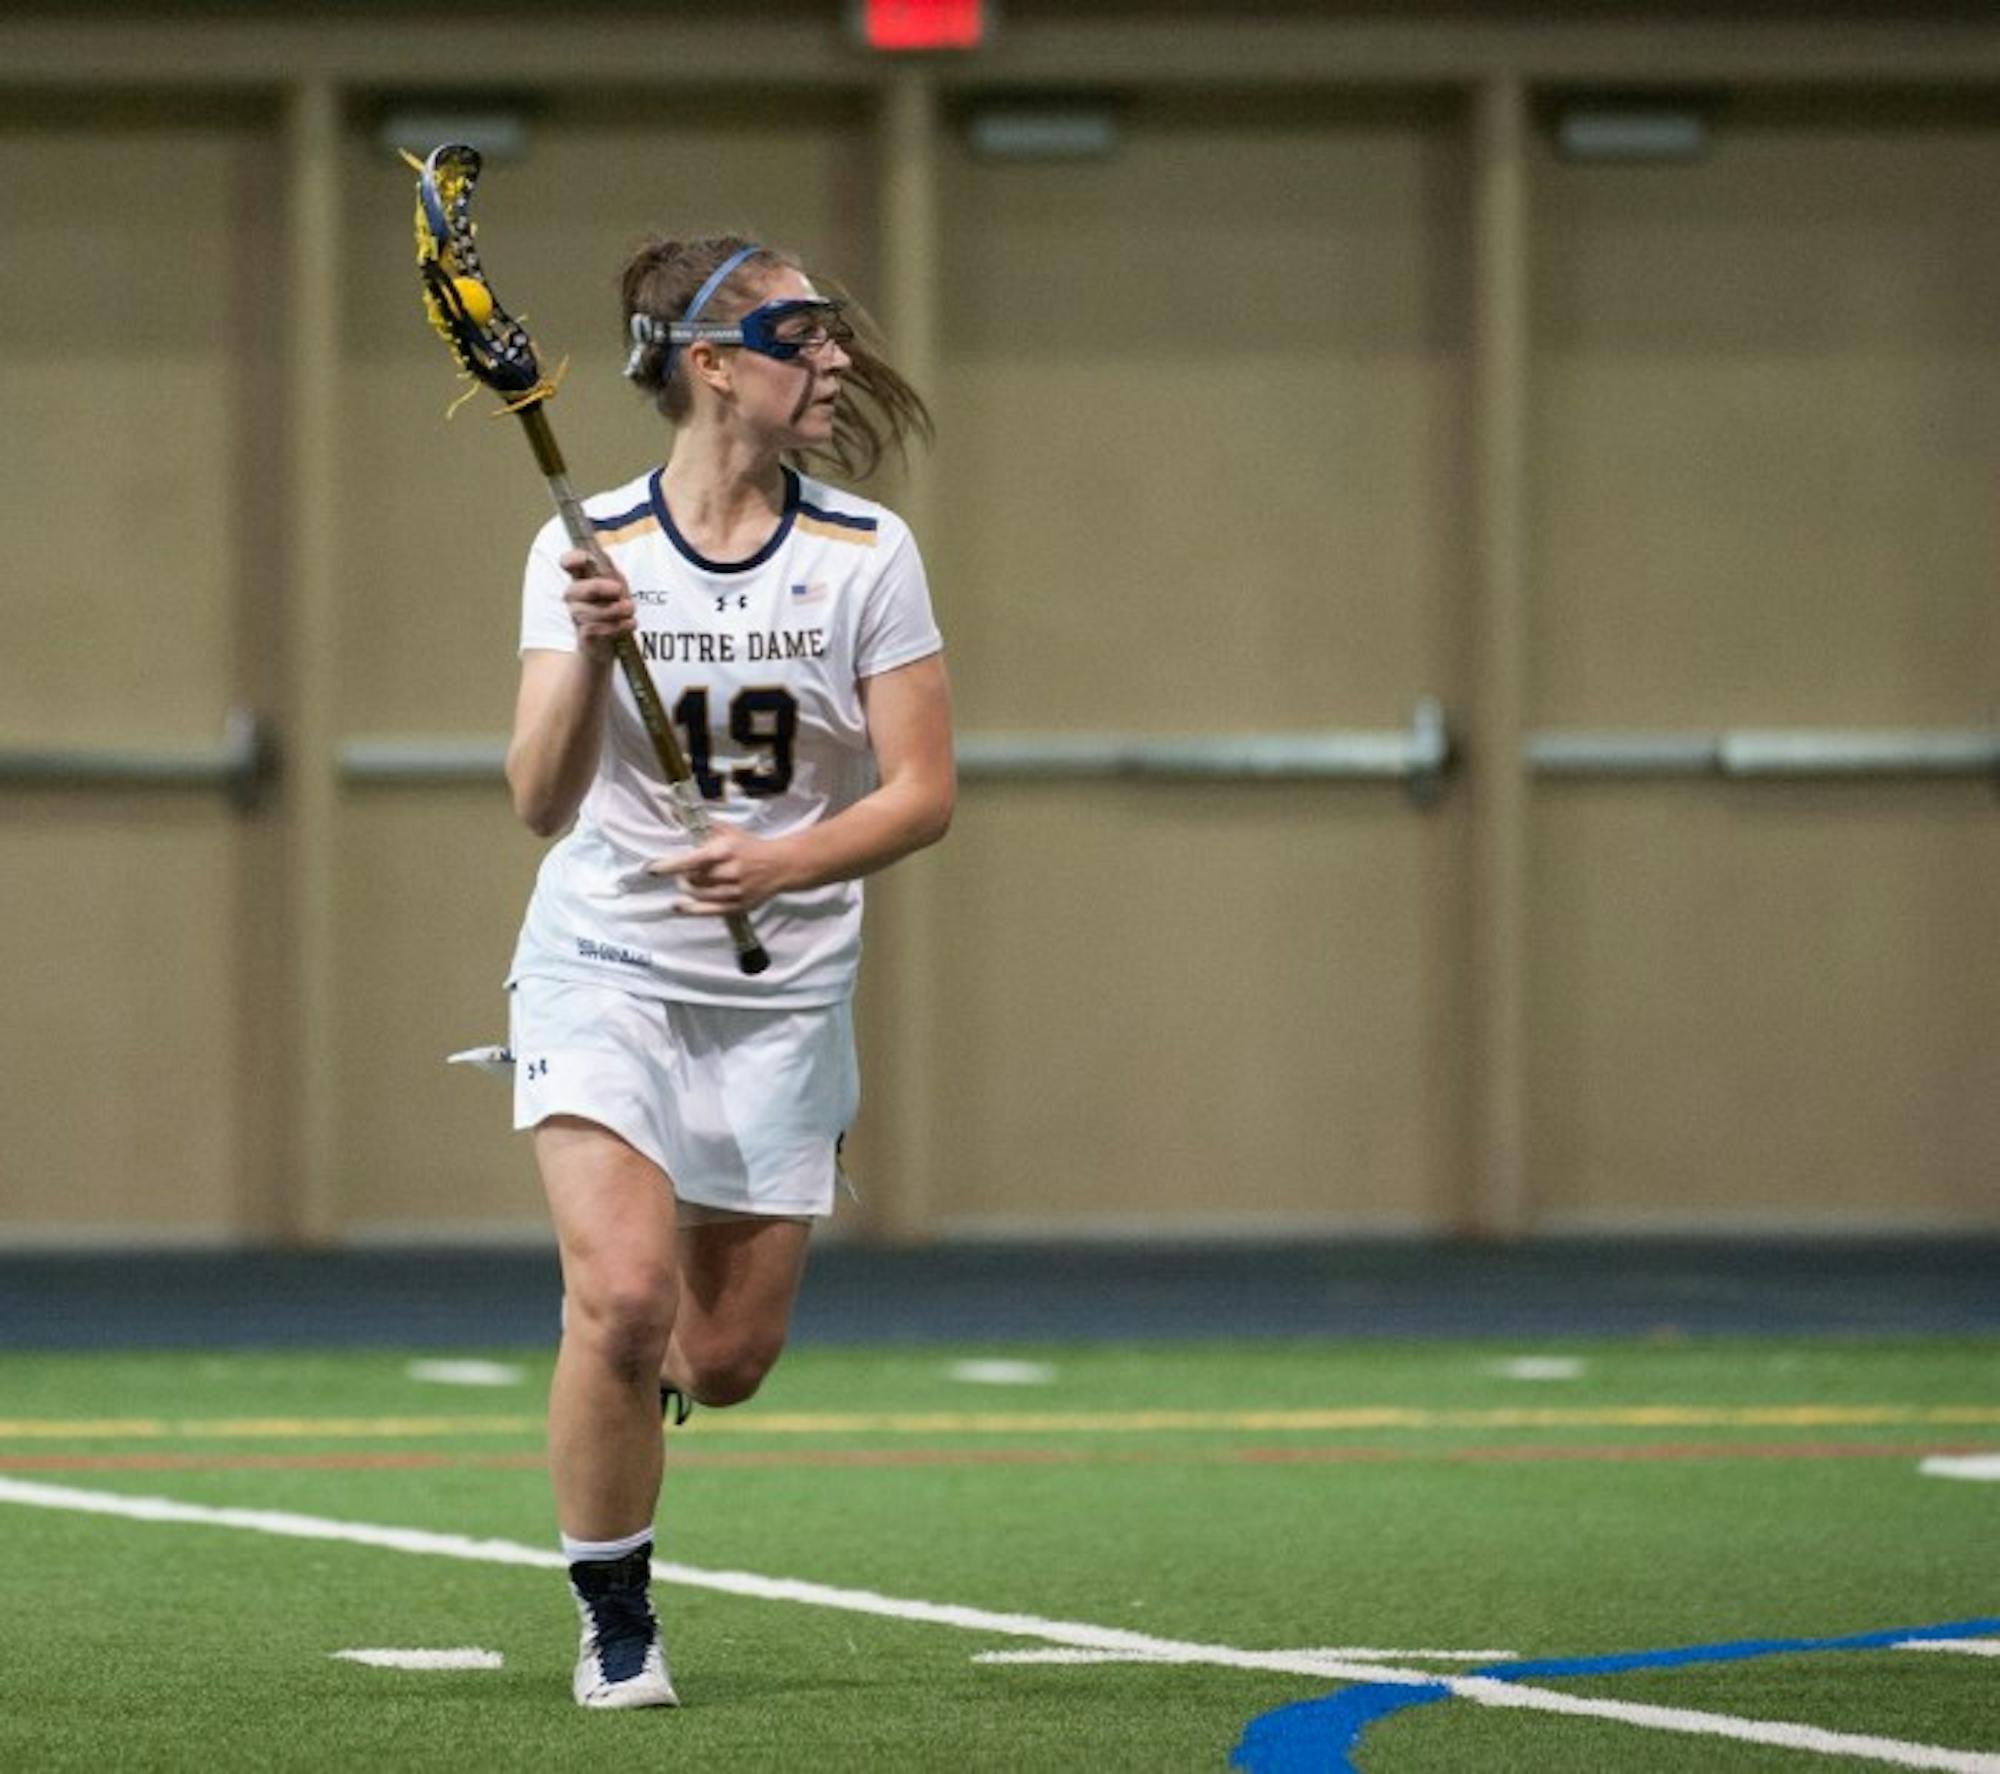 Irish sophomore midfielder Makenna Pearsall surveys the field during Notre Dame’s 24-9 victory over Detroit on Feb. 11 at Loftus Sports Complex. Pearsall has four goals and one assist on the season.